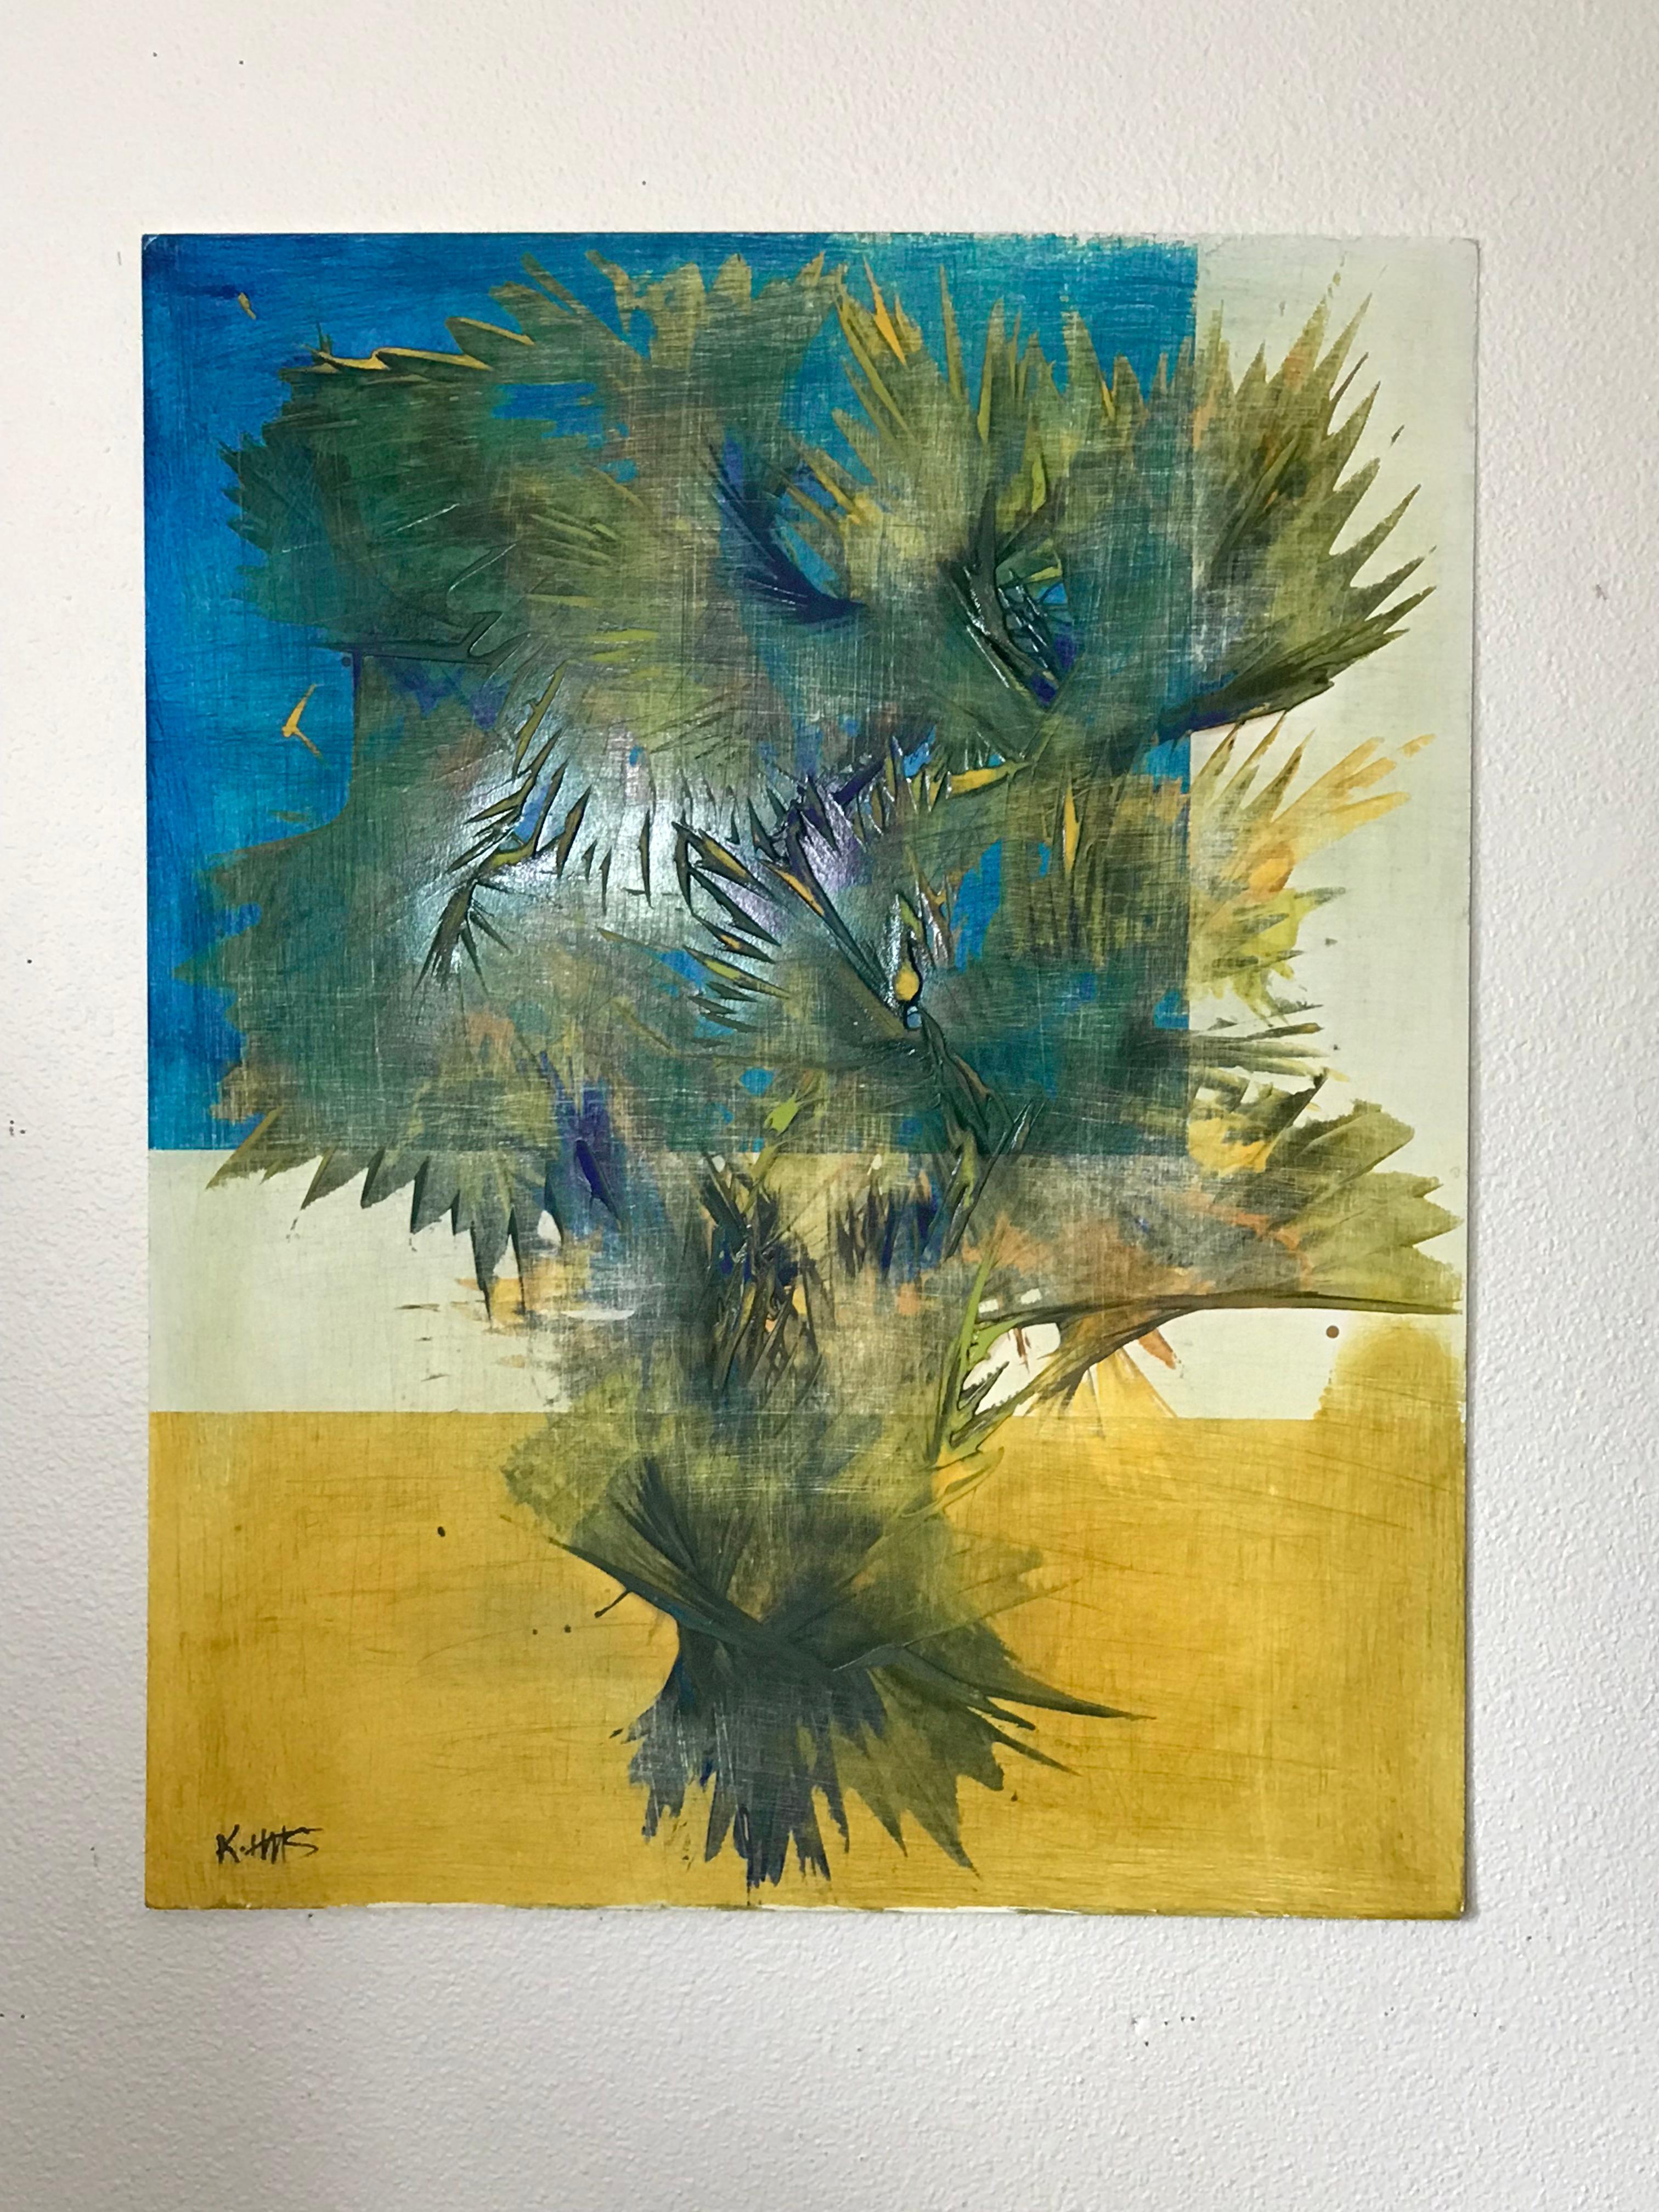 <p>Artist Comments<br>A modern distressed abstract in hues of black, blue, and yellow by artist Kris Haas. Feather-like shapes spread and spiral from top to bottom leaving varying shades of green and blue in its wake. Brighter shades of yellow